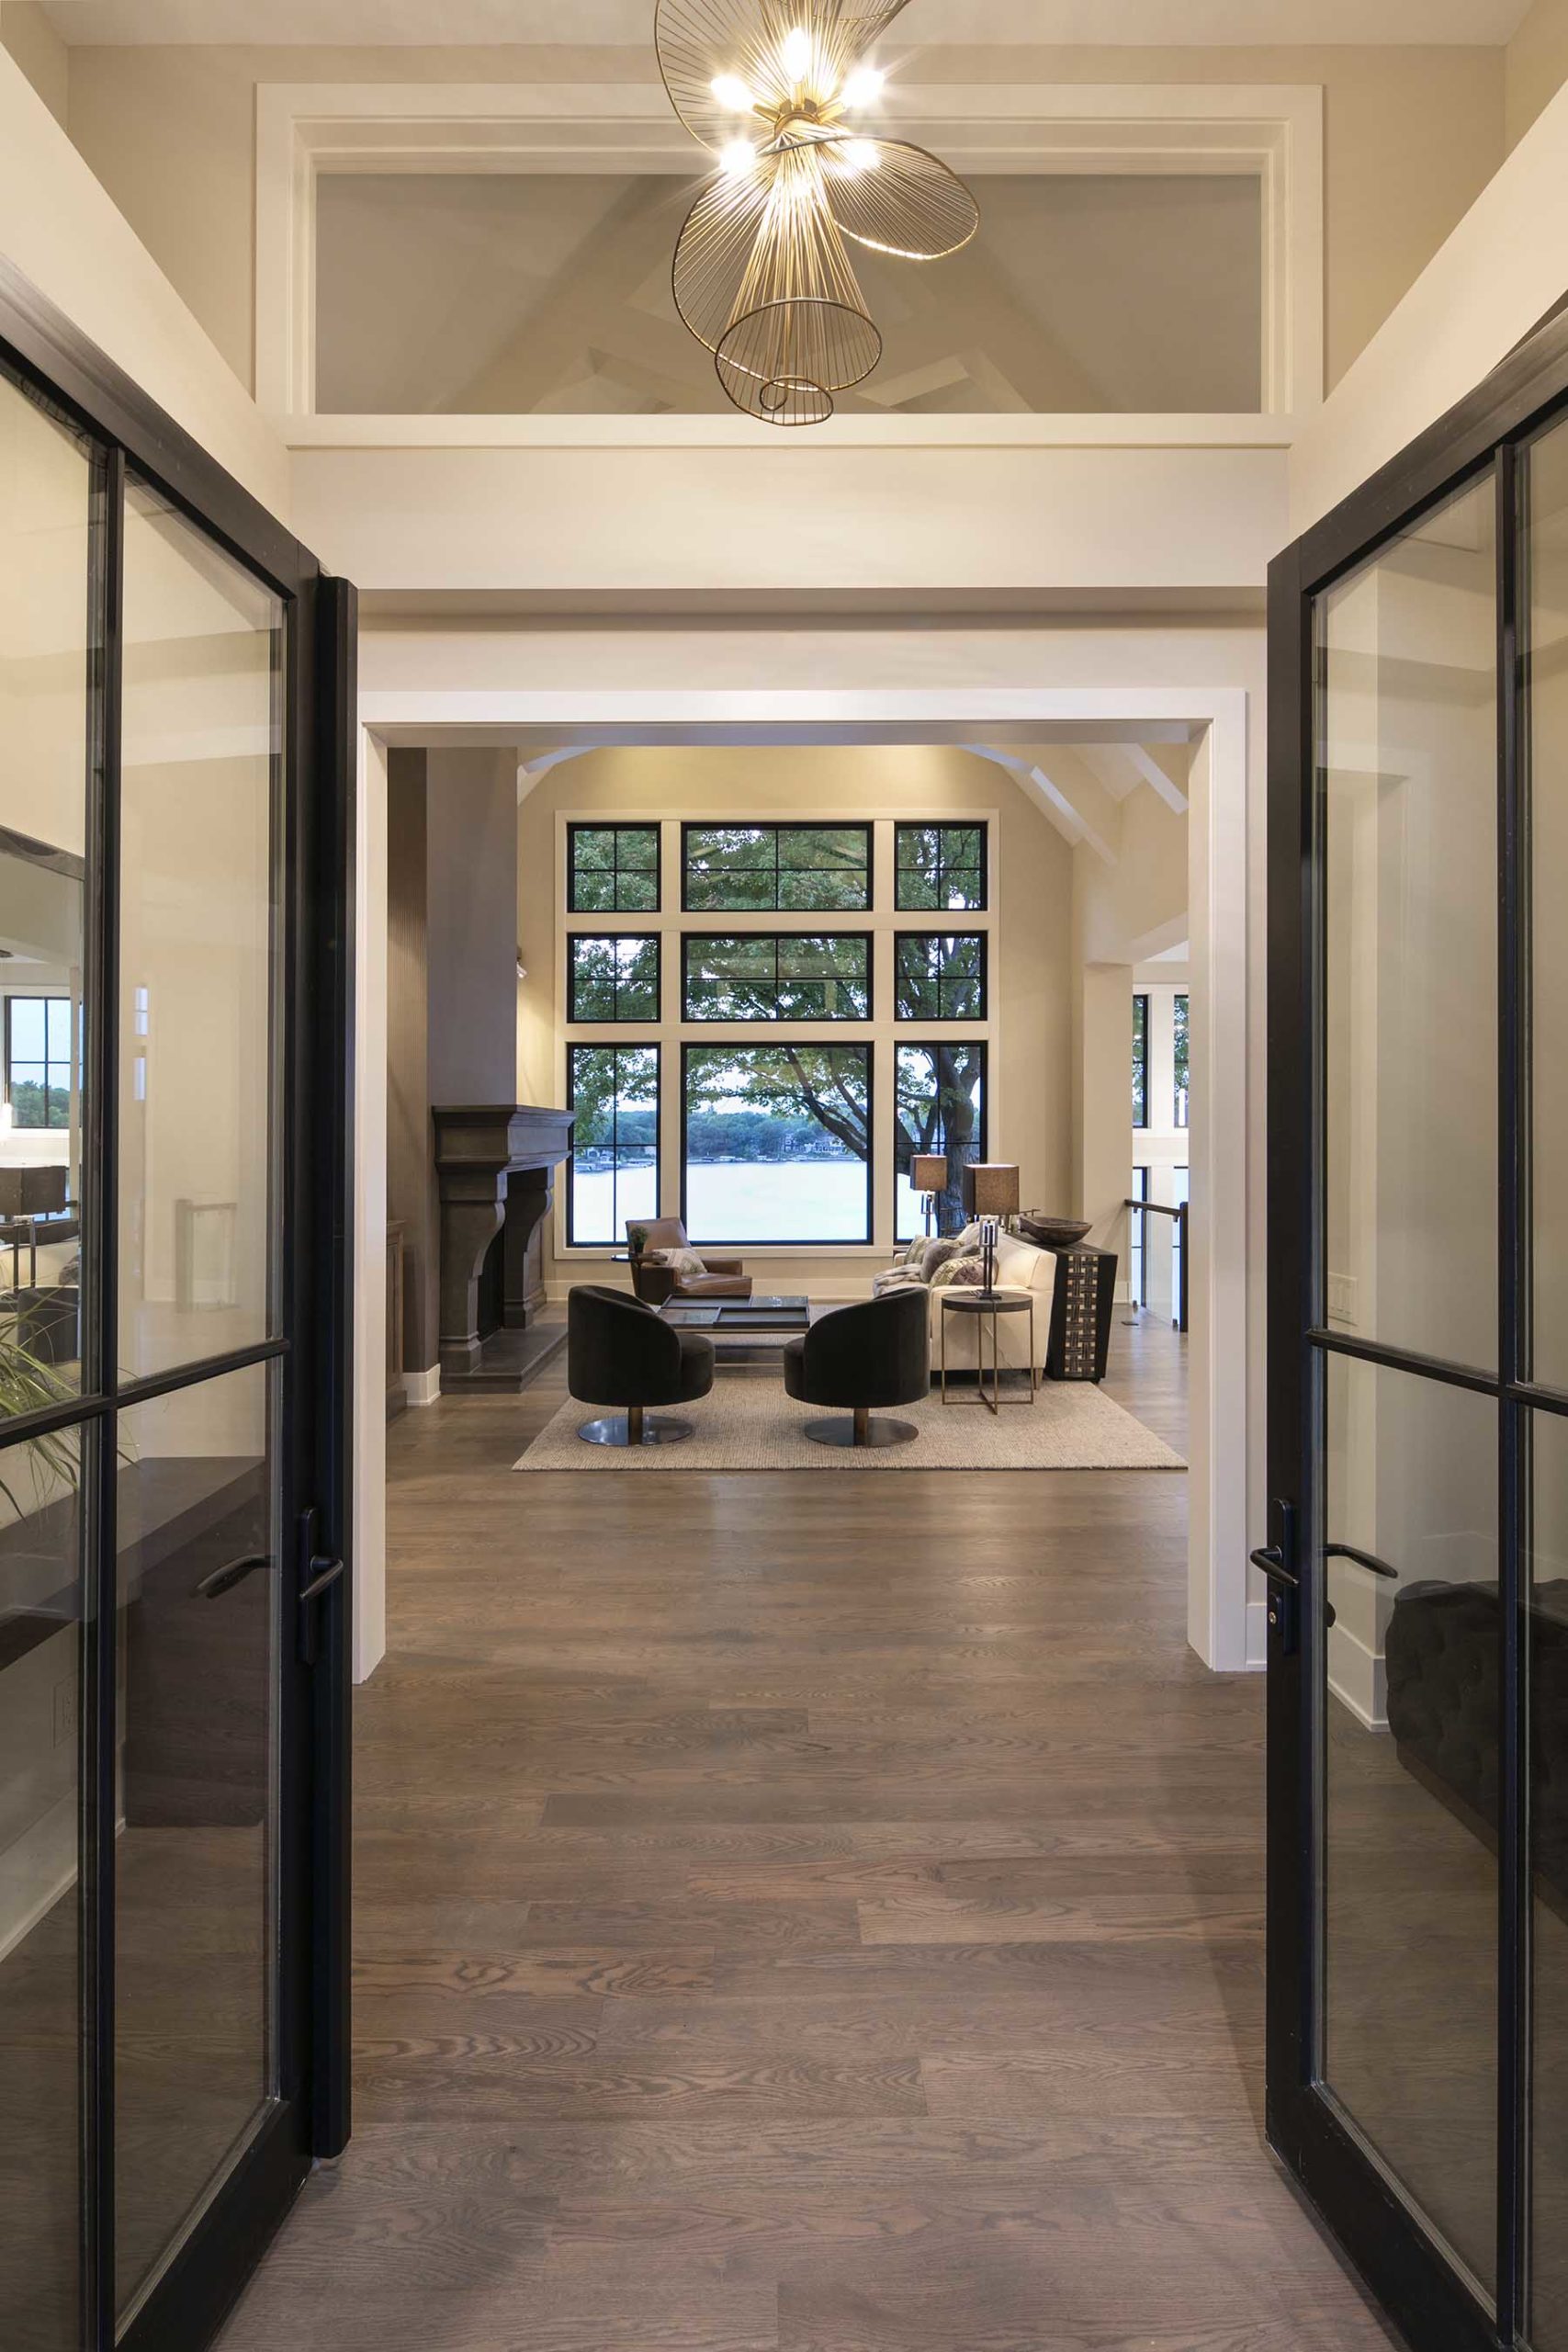 A glass door leads into a large living room.